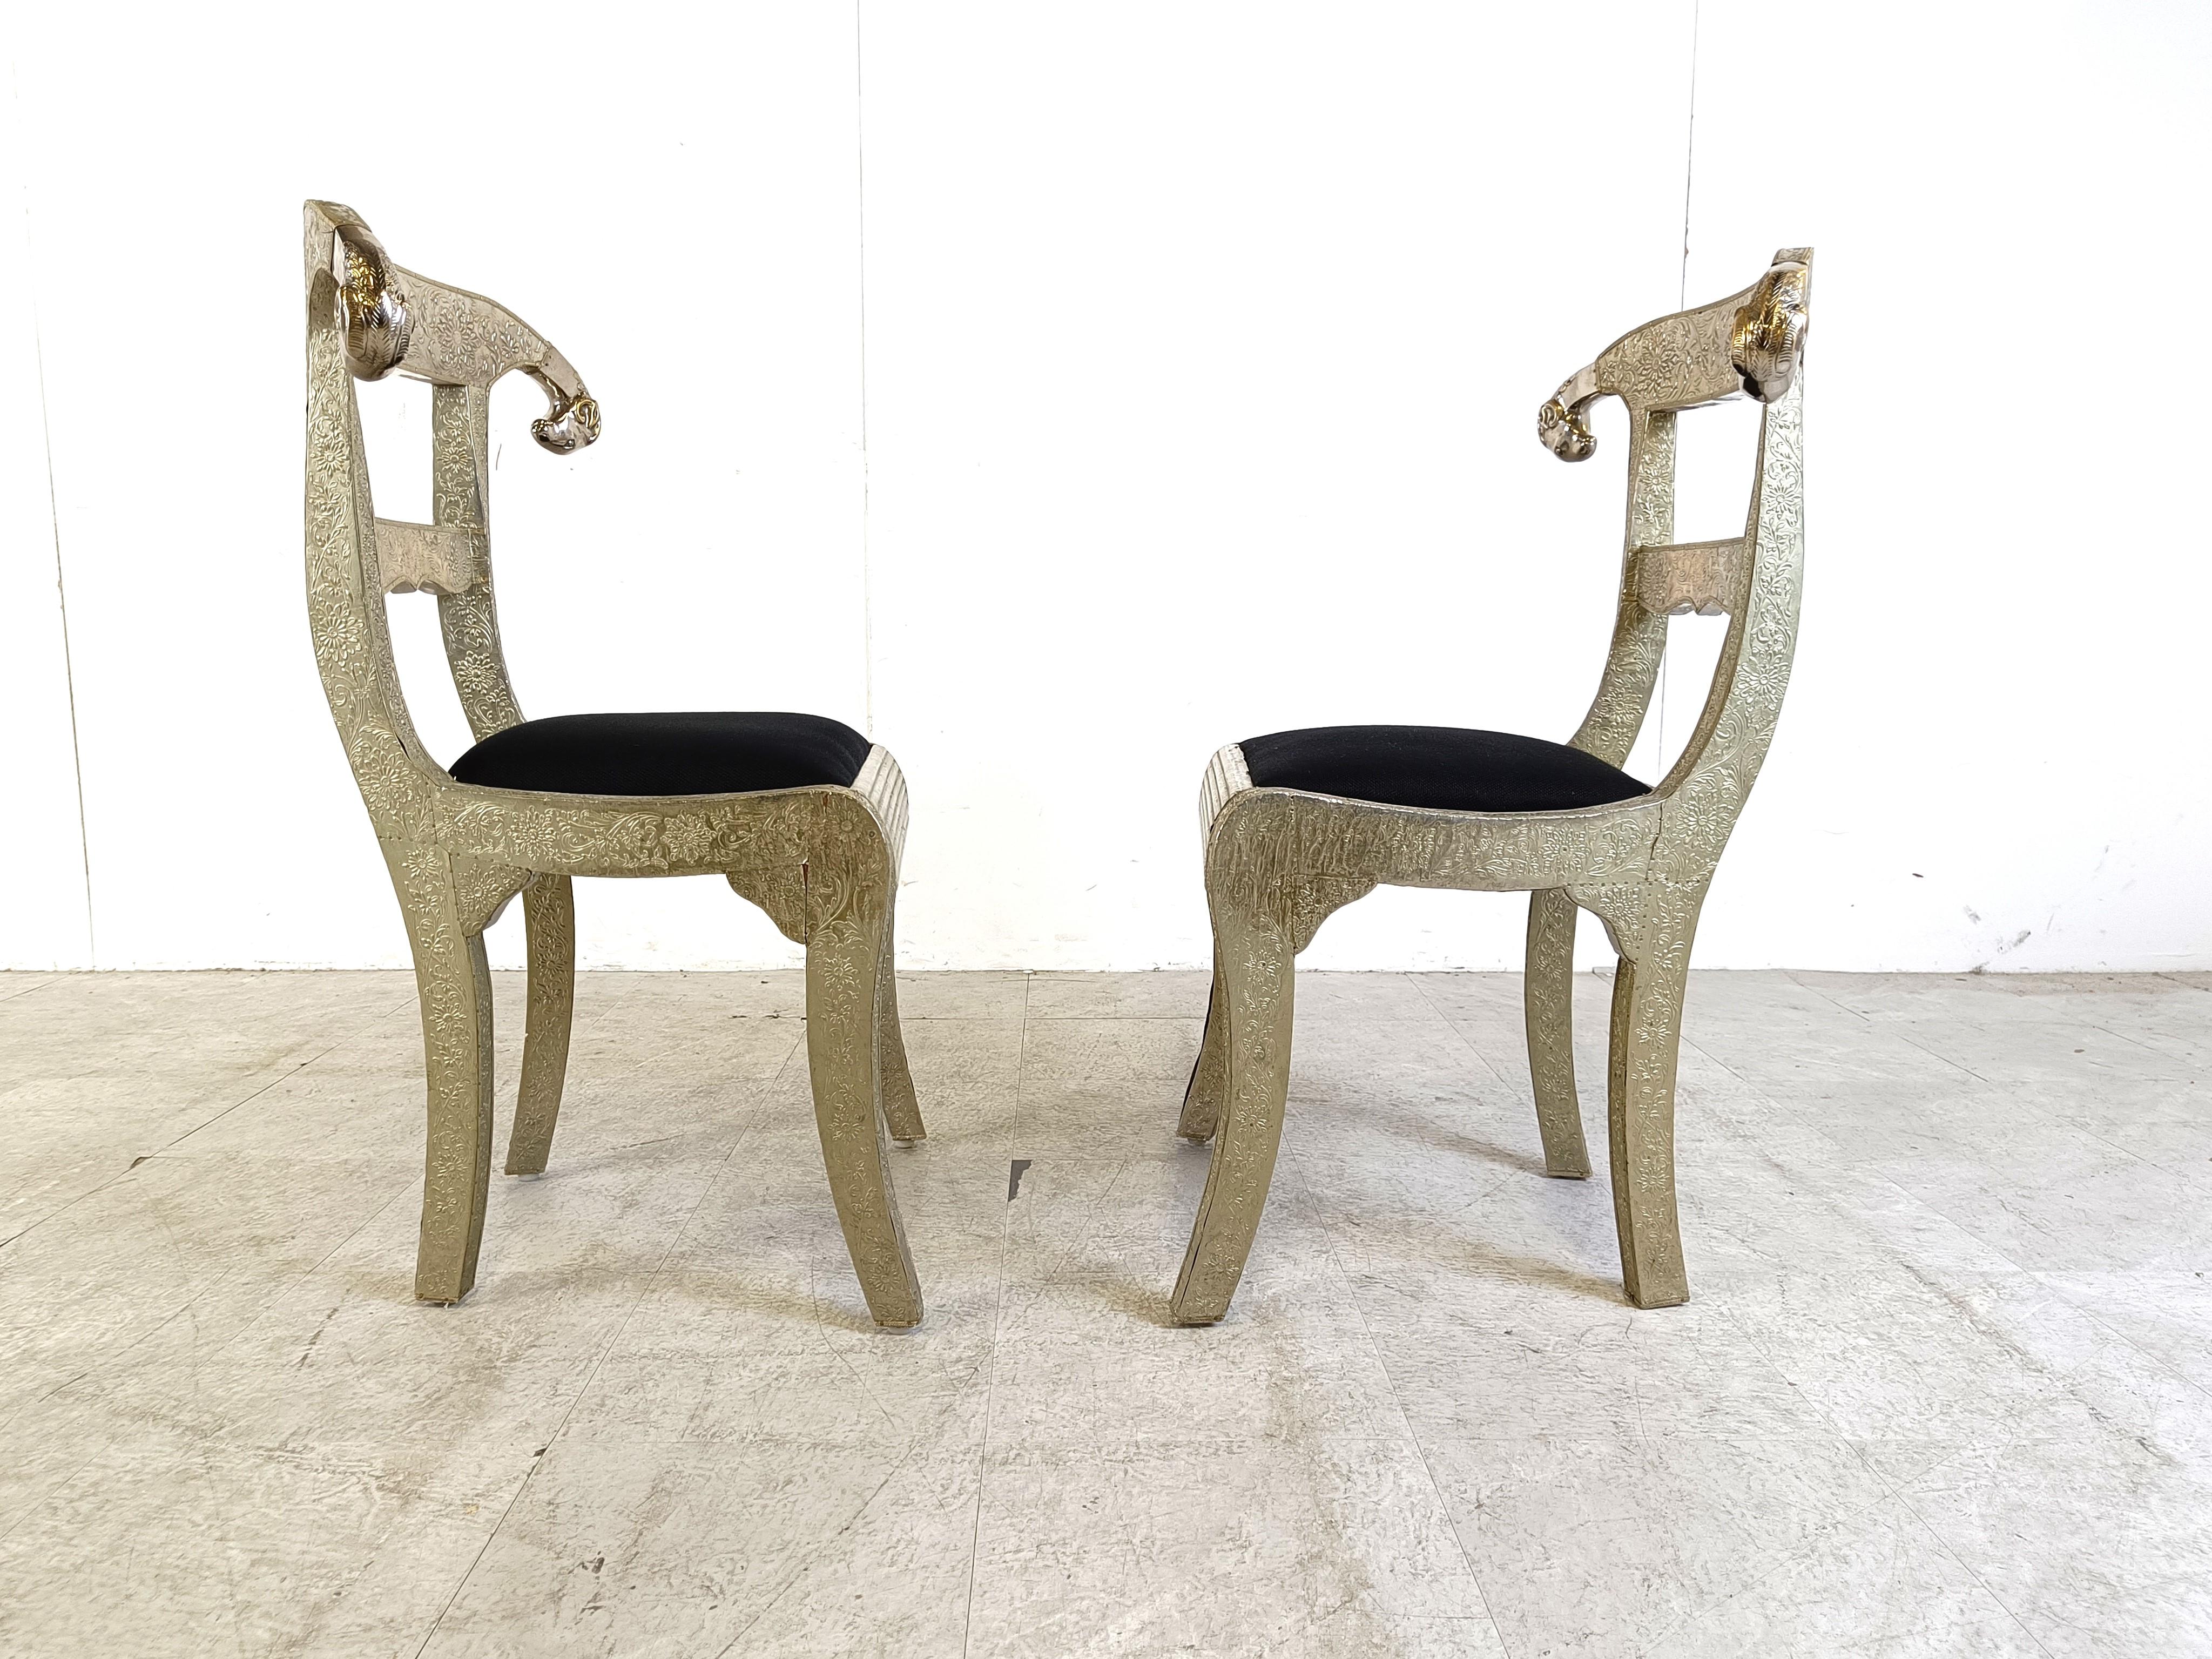 Anglo-Indian silvered dowry chairs, 1950s For Sale 4